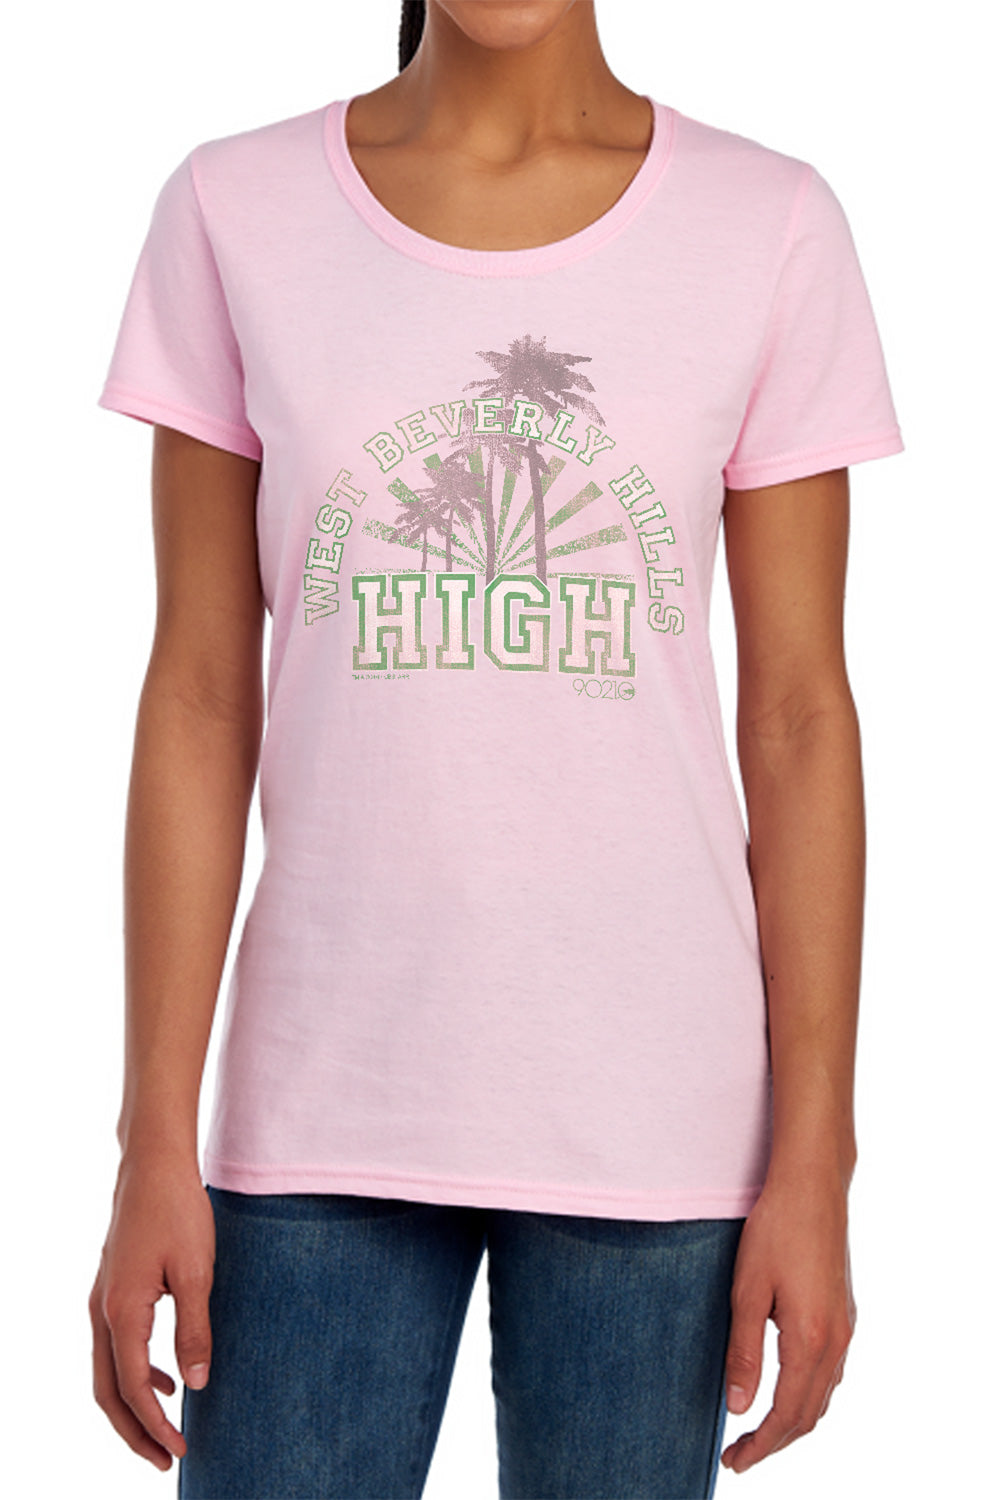 90210 : WEST BEVERLY HILLS HIGH S\S WOMENS TEE PINK MD